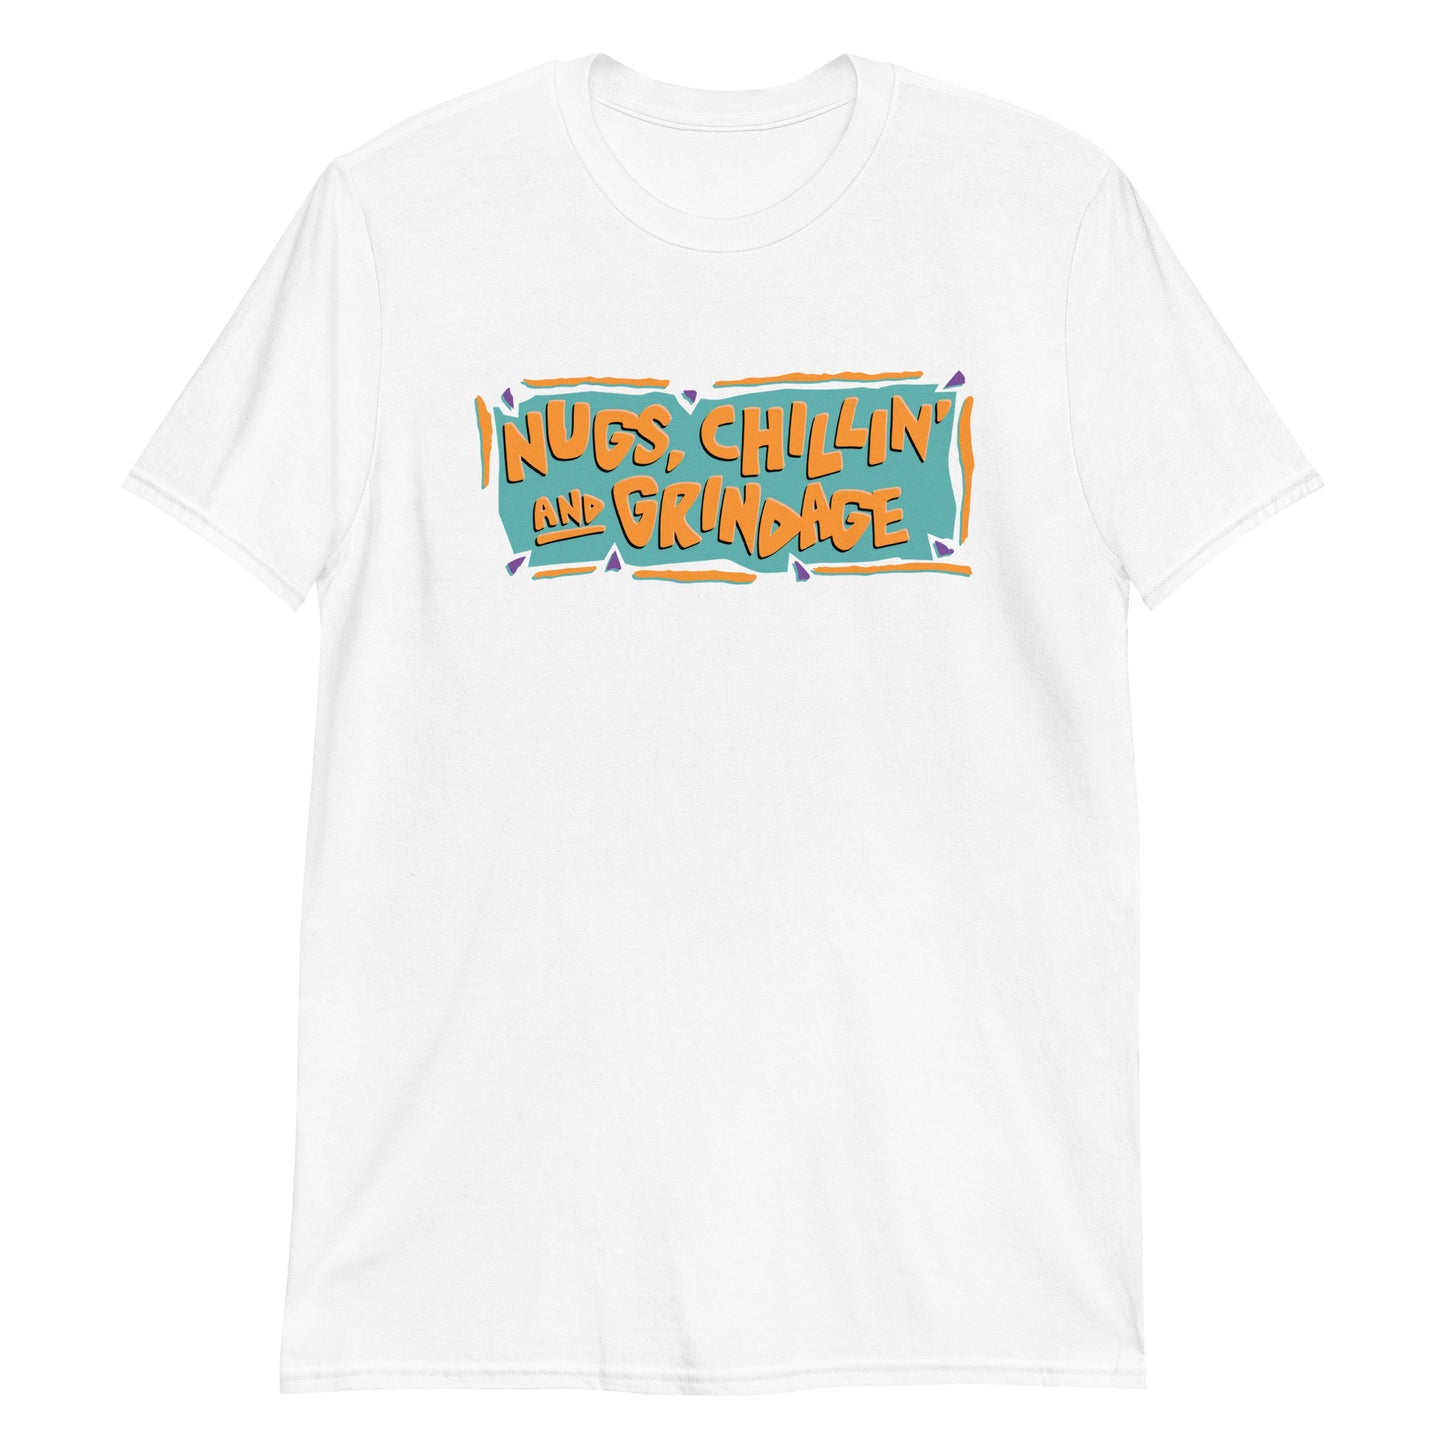 Nugs Chillin and Grindage t-shirt